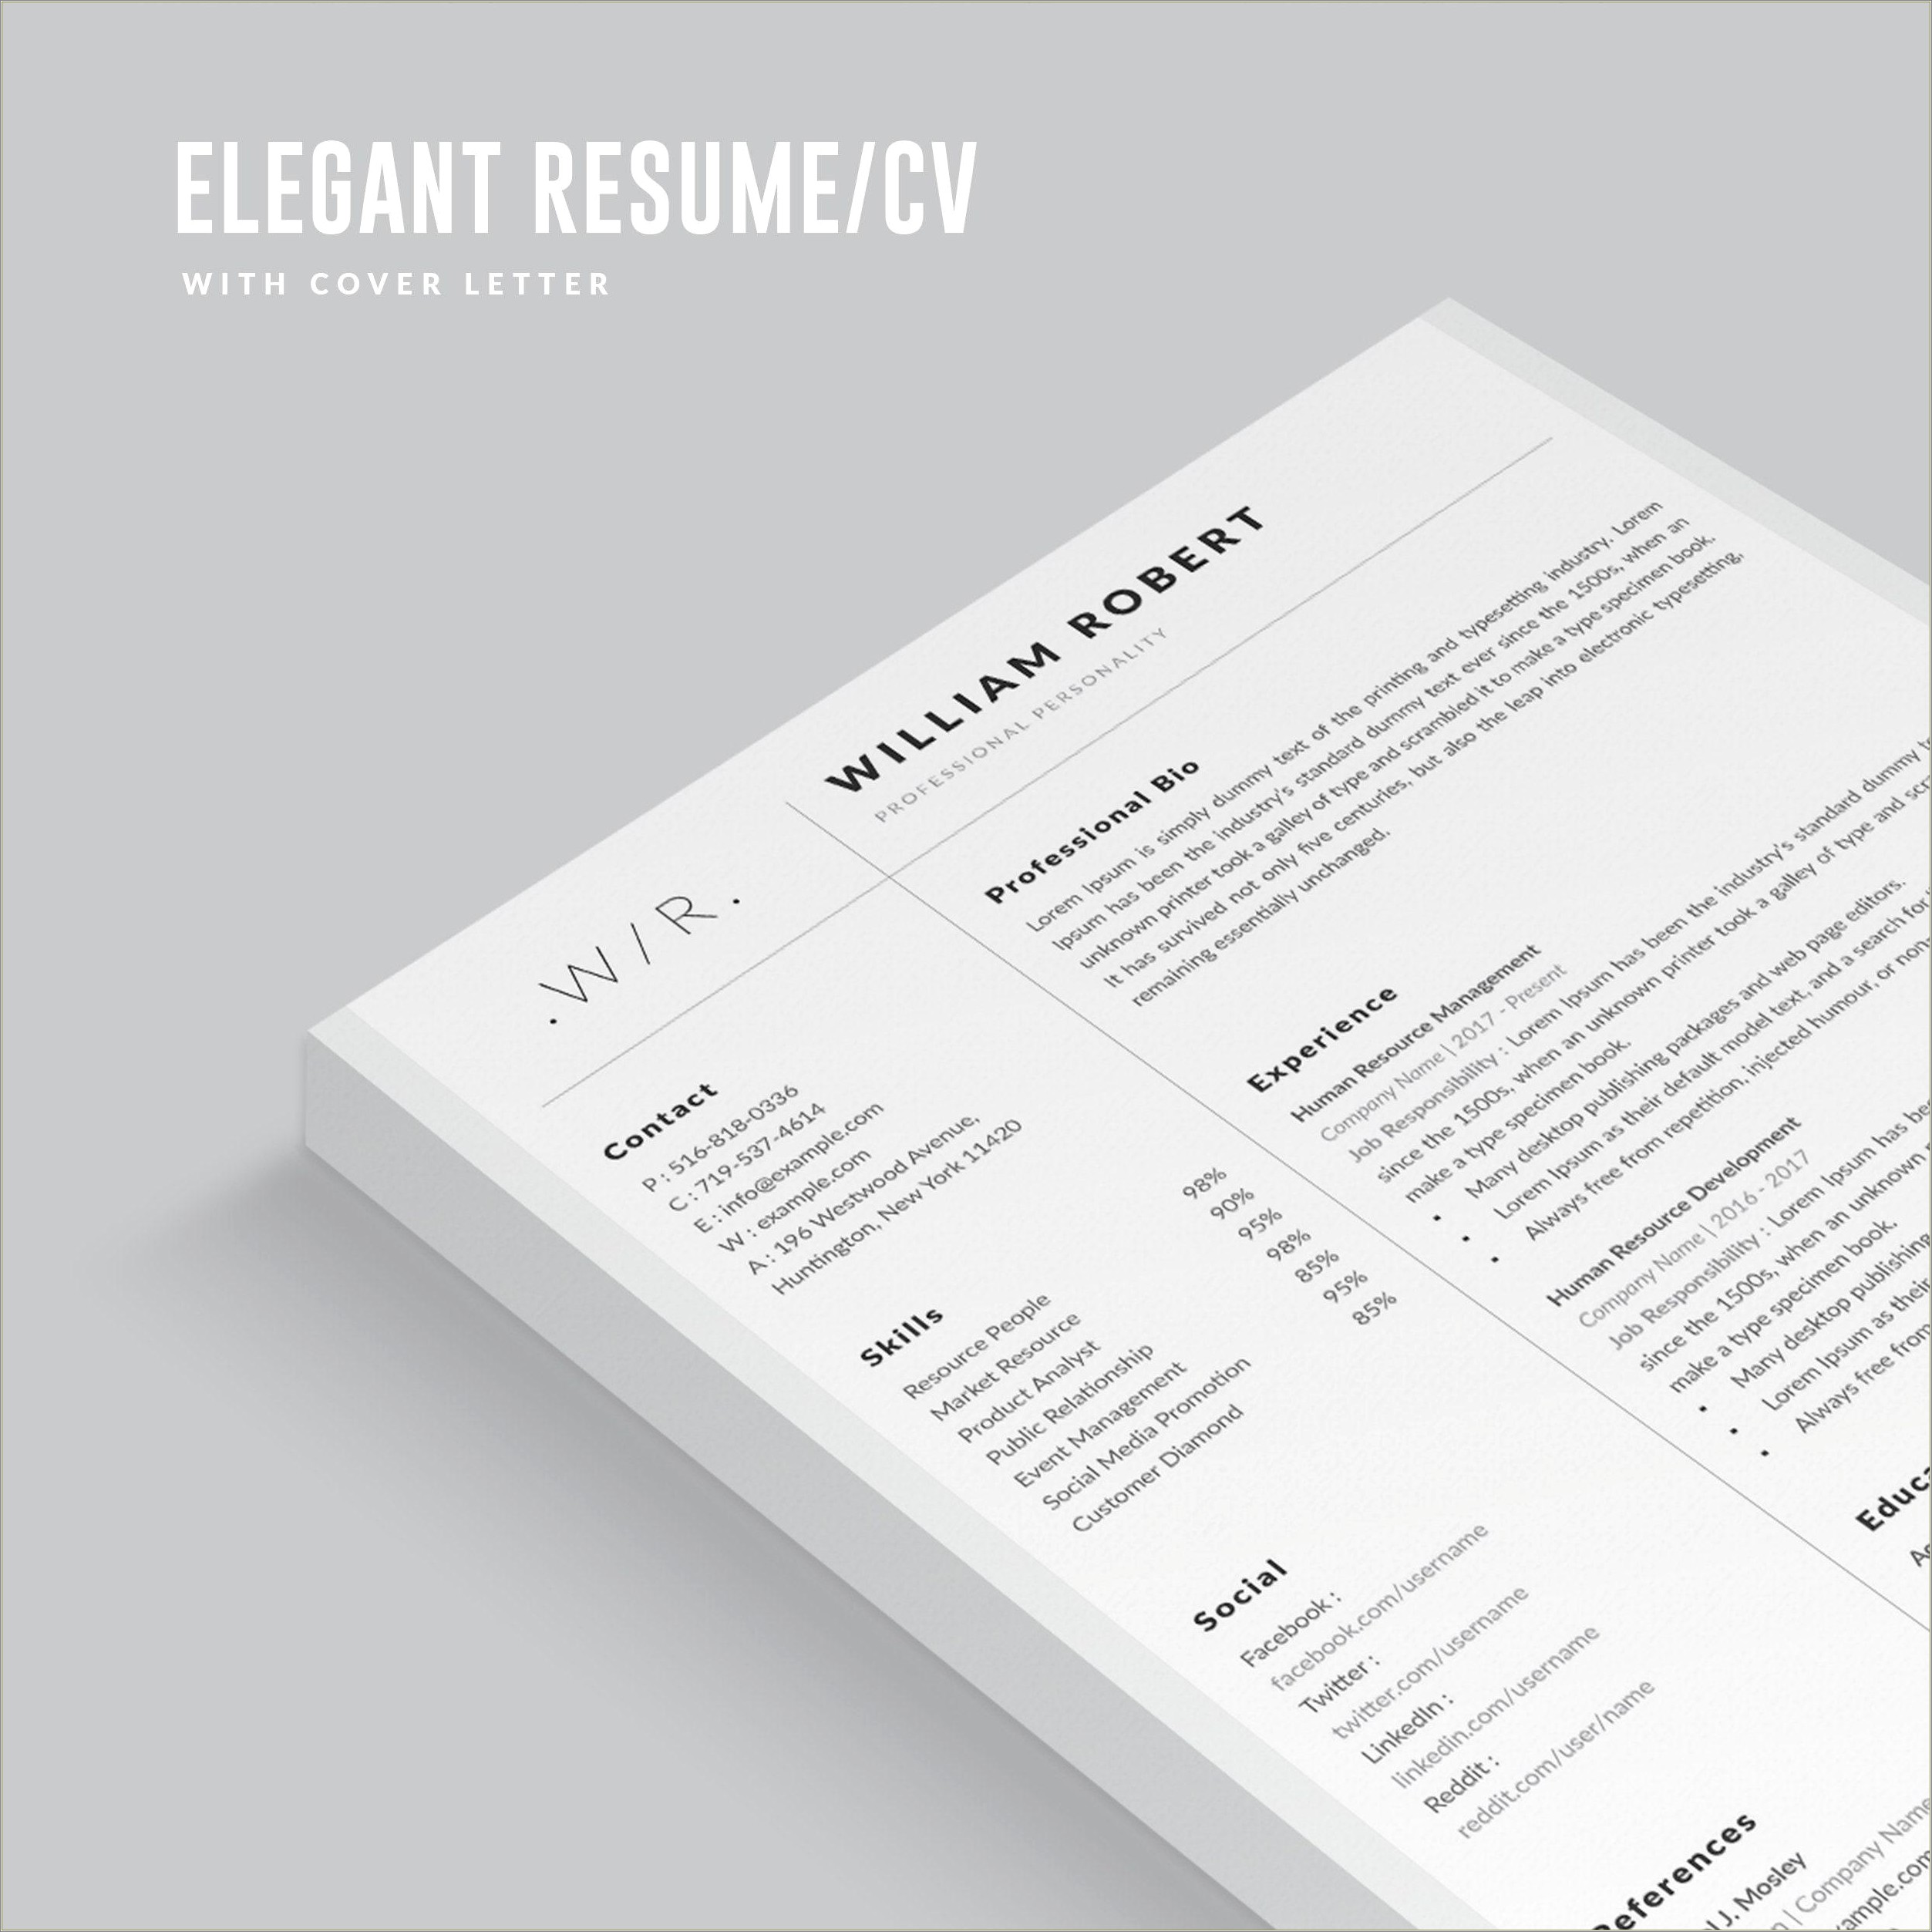 Example Of A Desktop Publisher Resume